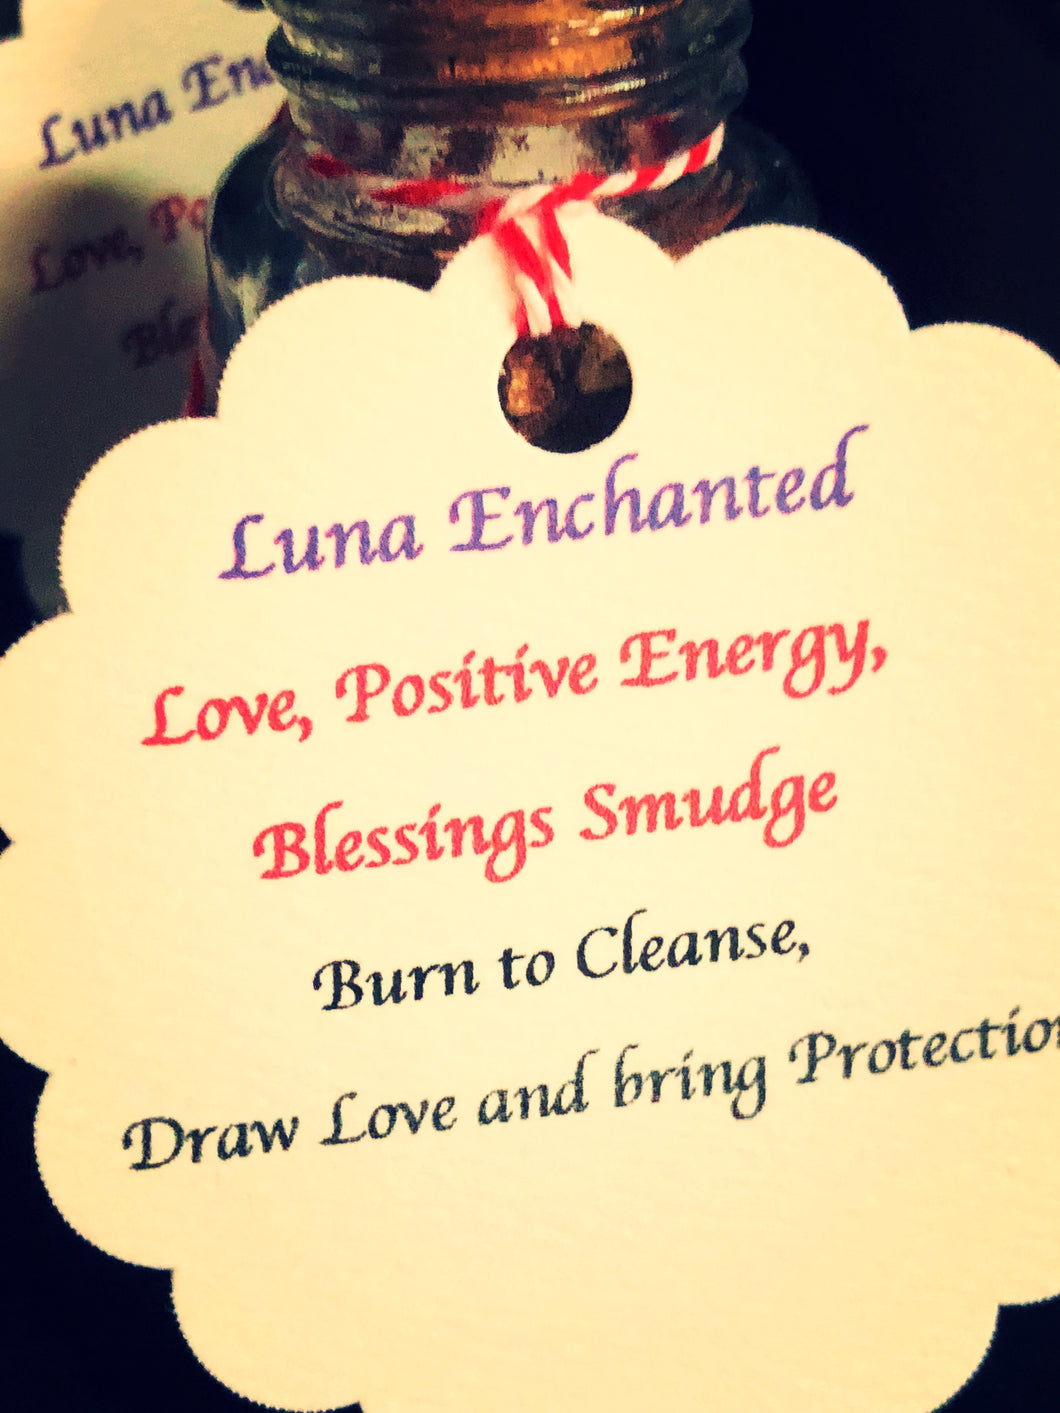 Love, Positive Energy Blessings Smudge Incense Blend